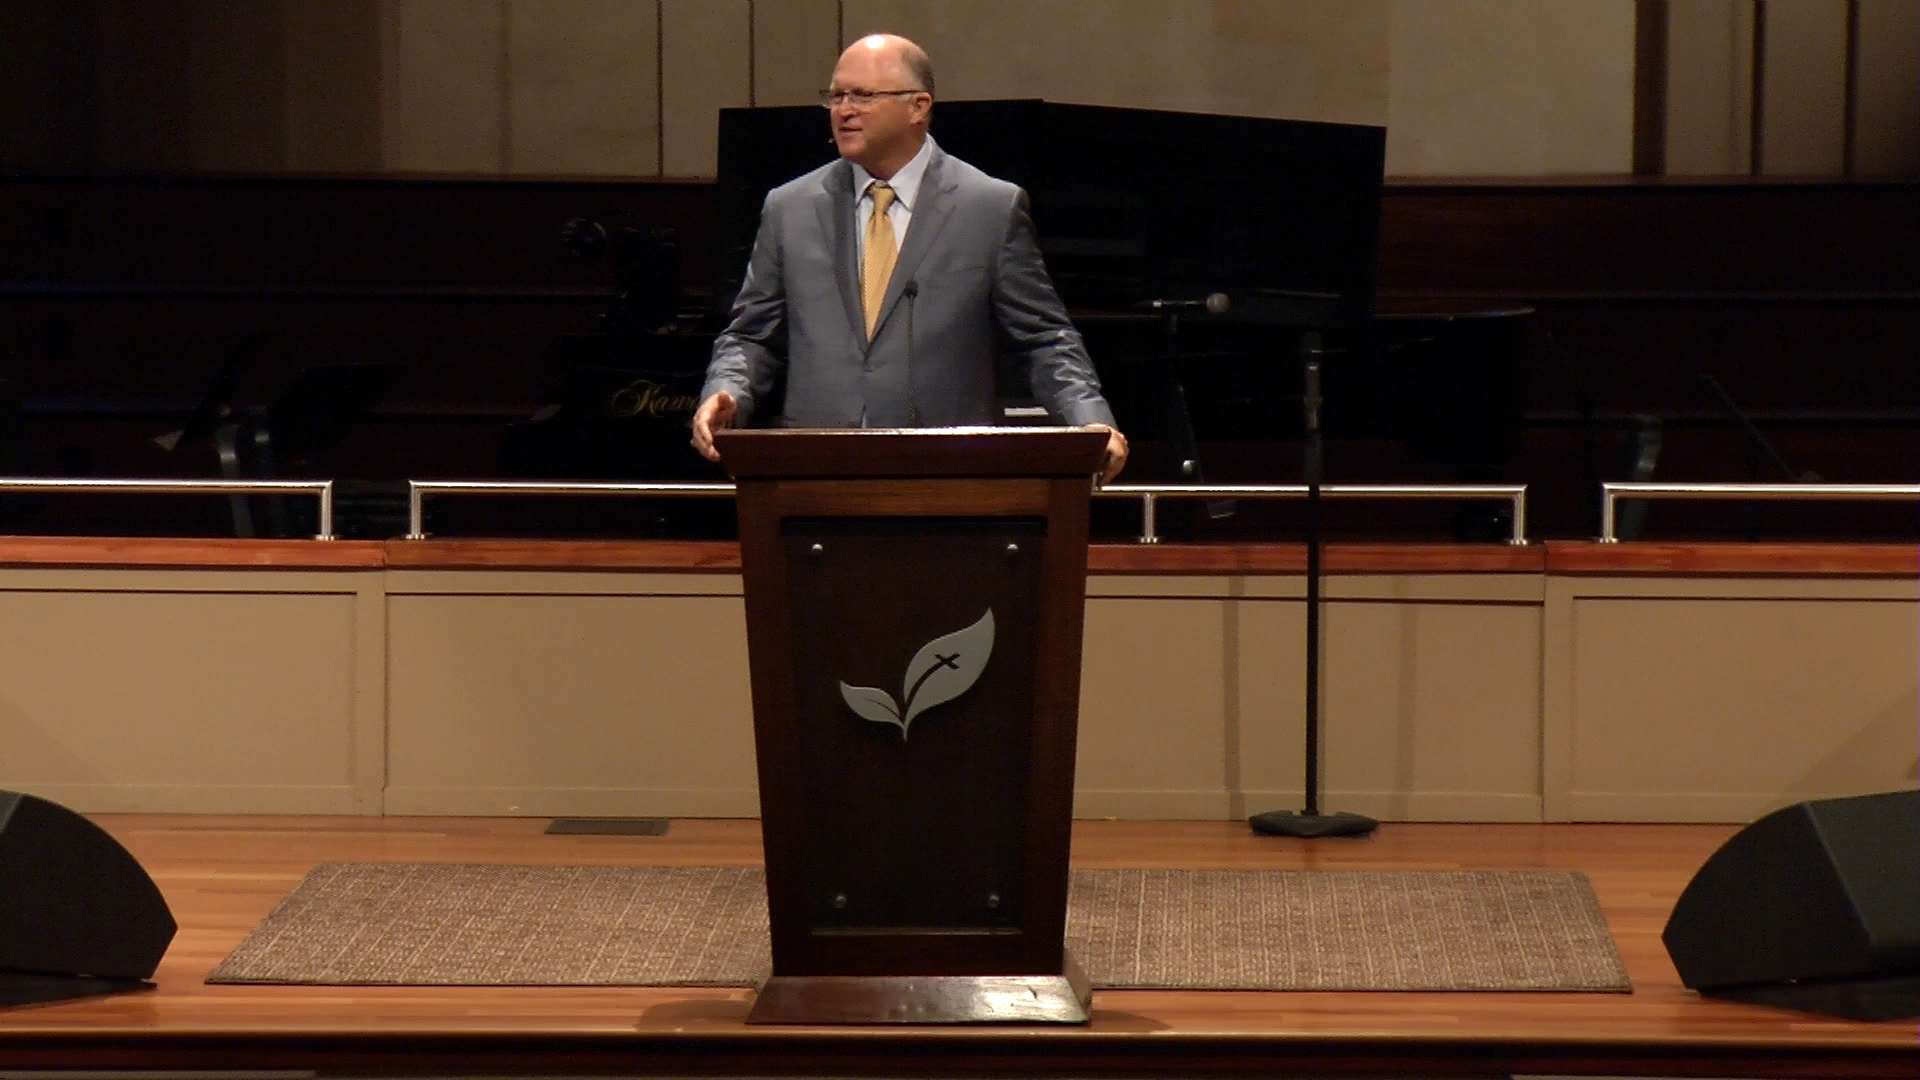 Pastor Paul Chappell: Discernment of the Spiritually Tenacious